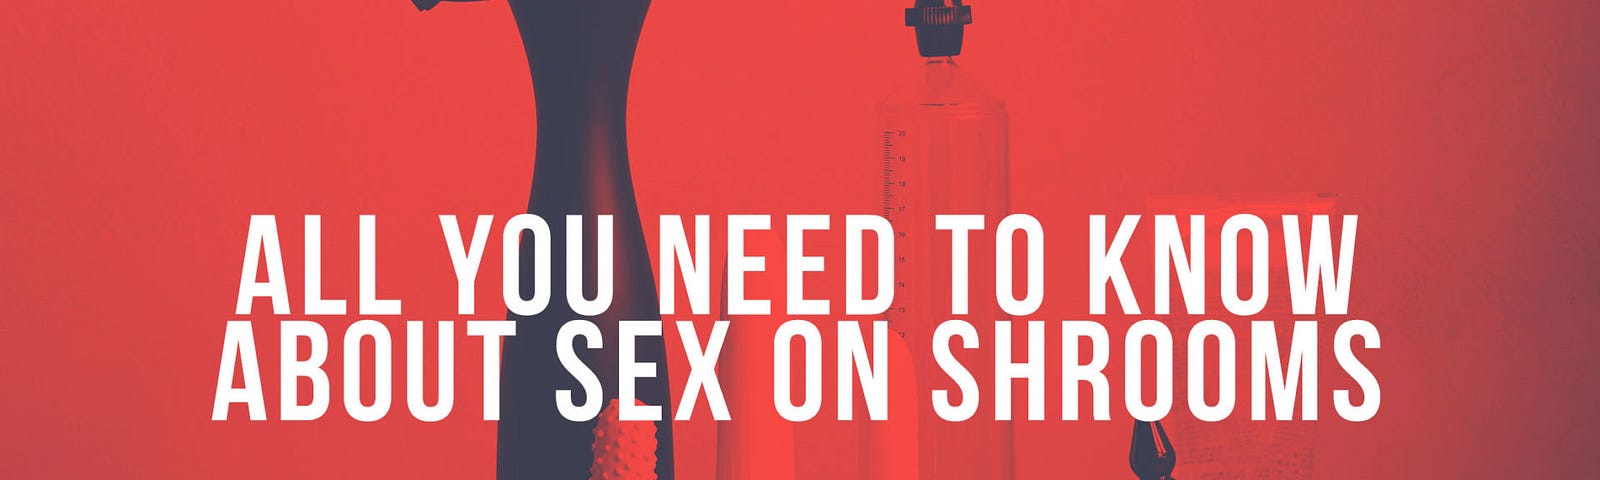 All you need to know about sex on shrooms